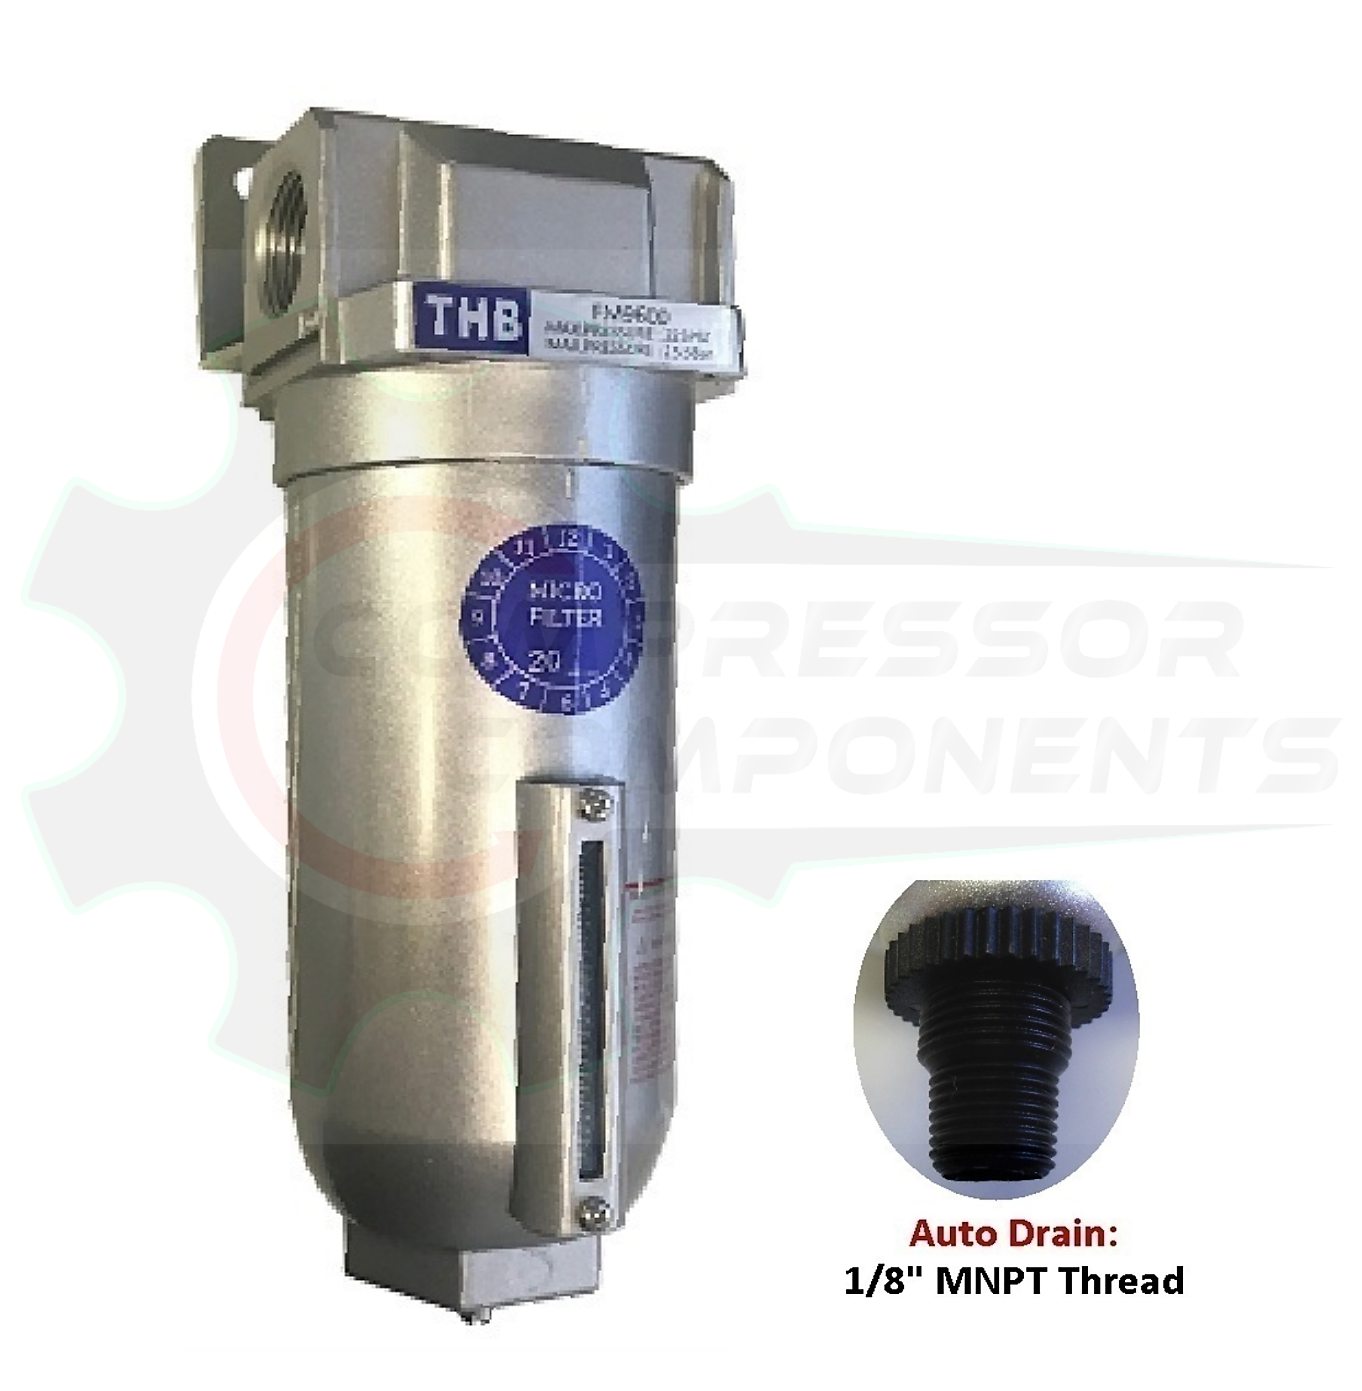 THB FM968A Coalescing Filter - 1" FNPT INDUSTRIAL GRADE HIGH FLOW  0.01 MICRON 170 CFM FILTER WITH AUTO DRAIN